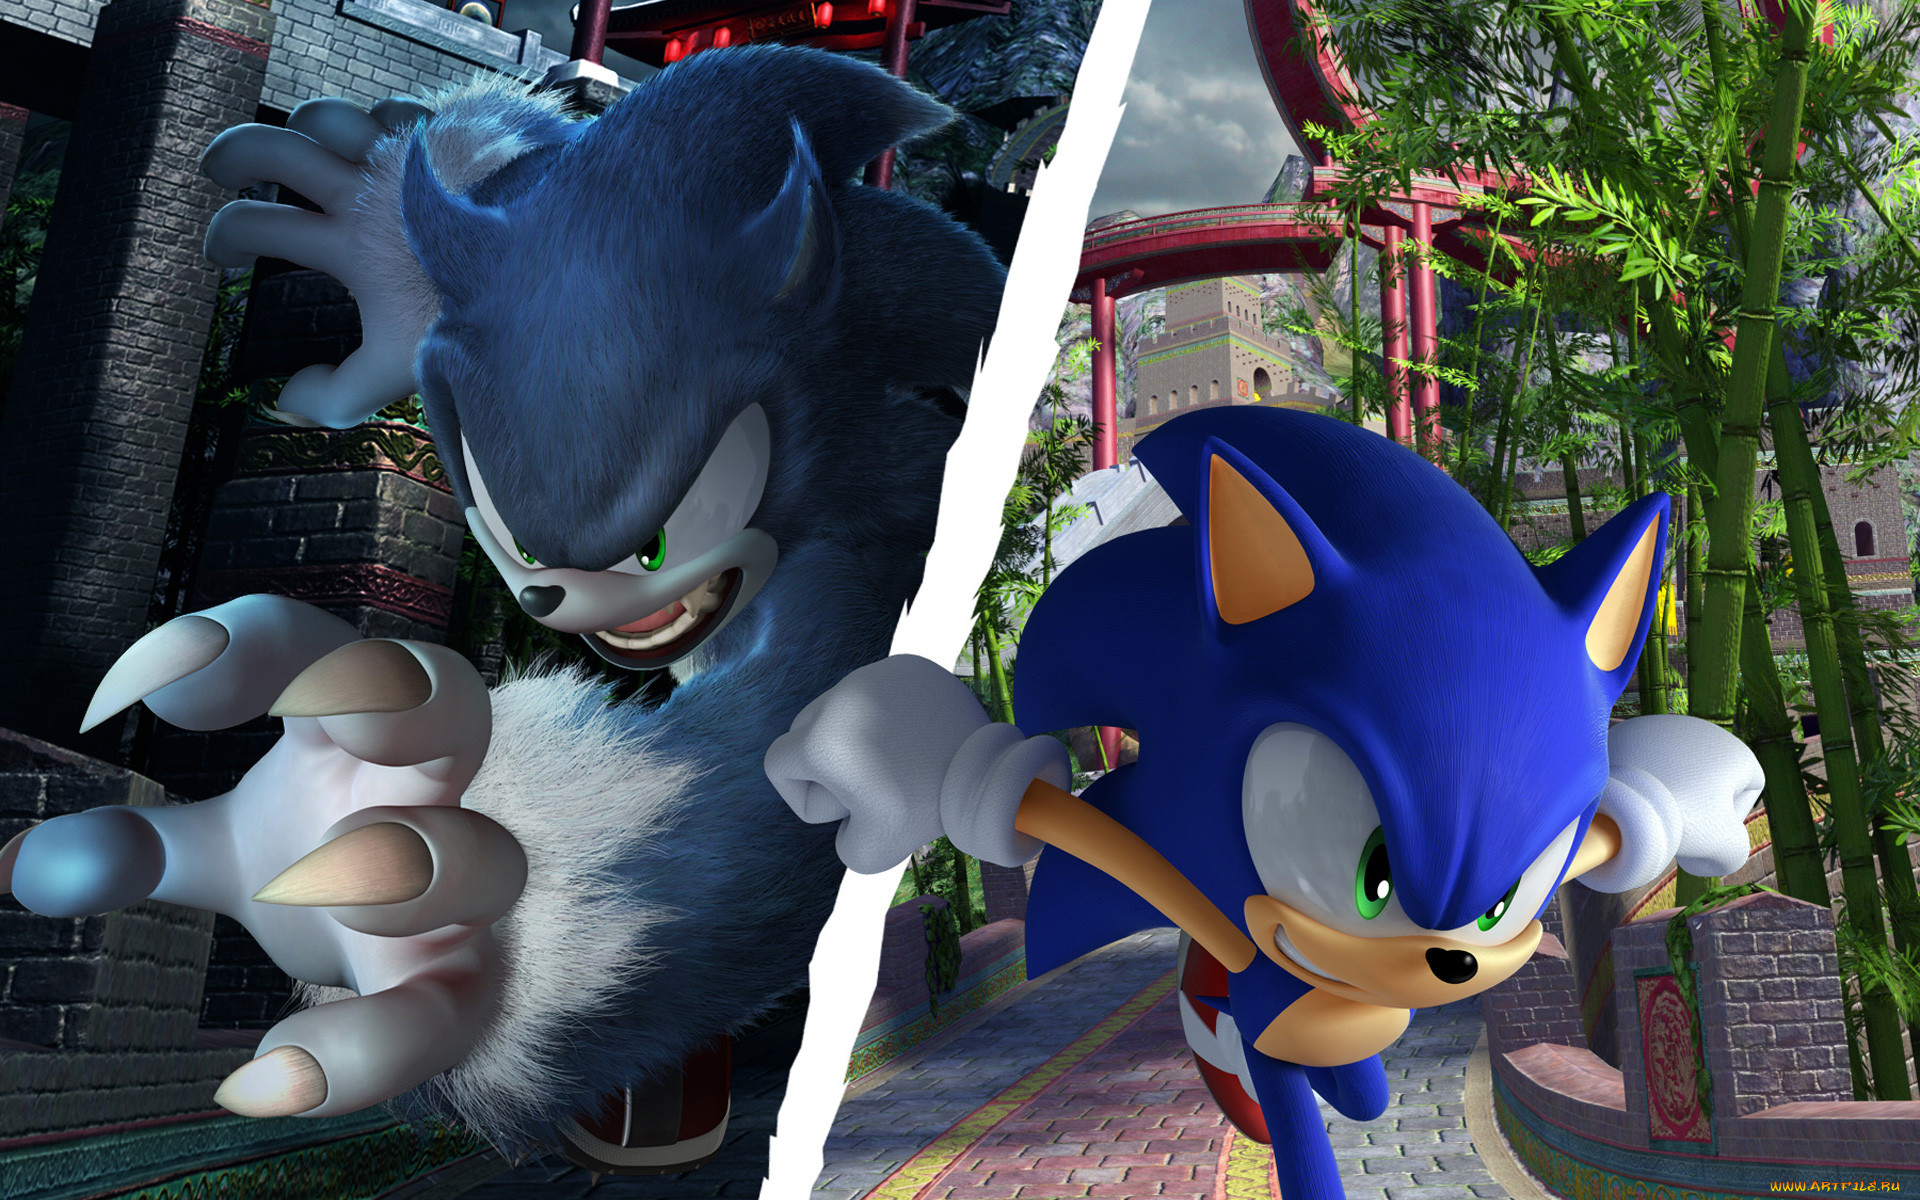  , sonic unleashed, 